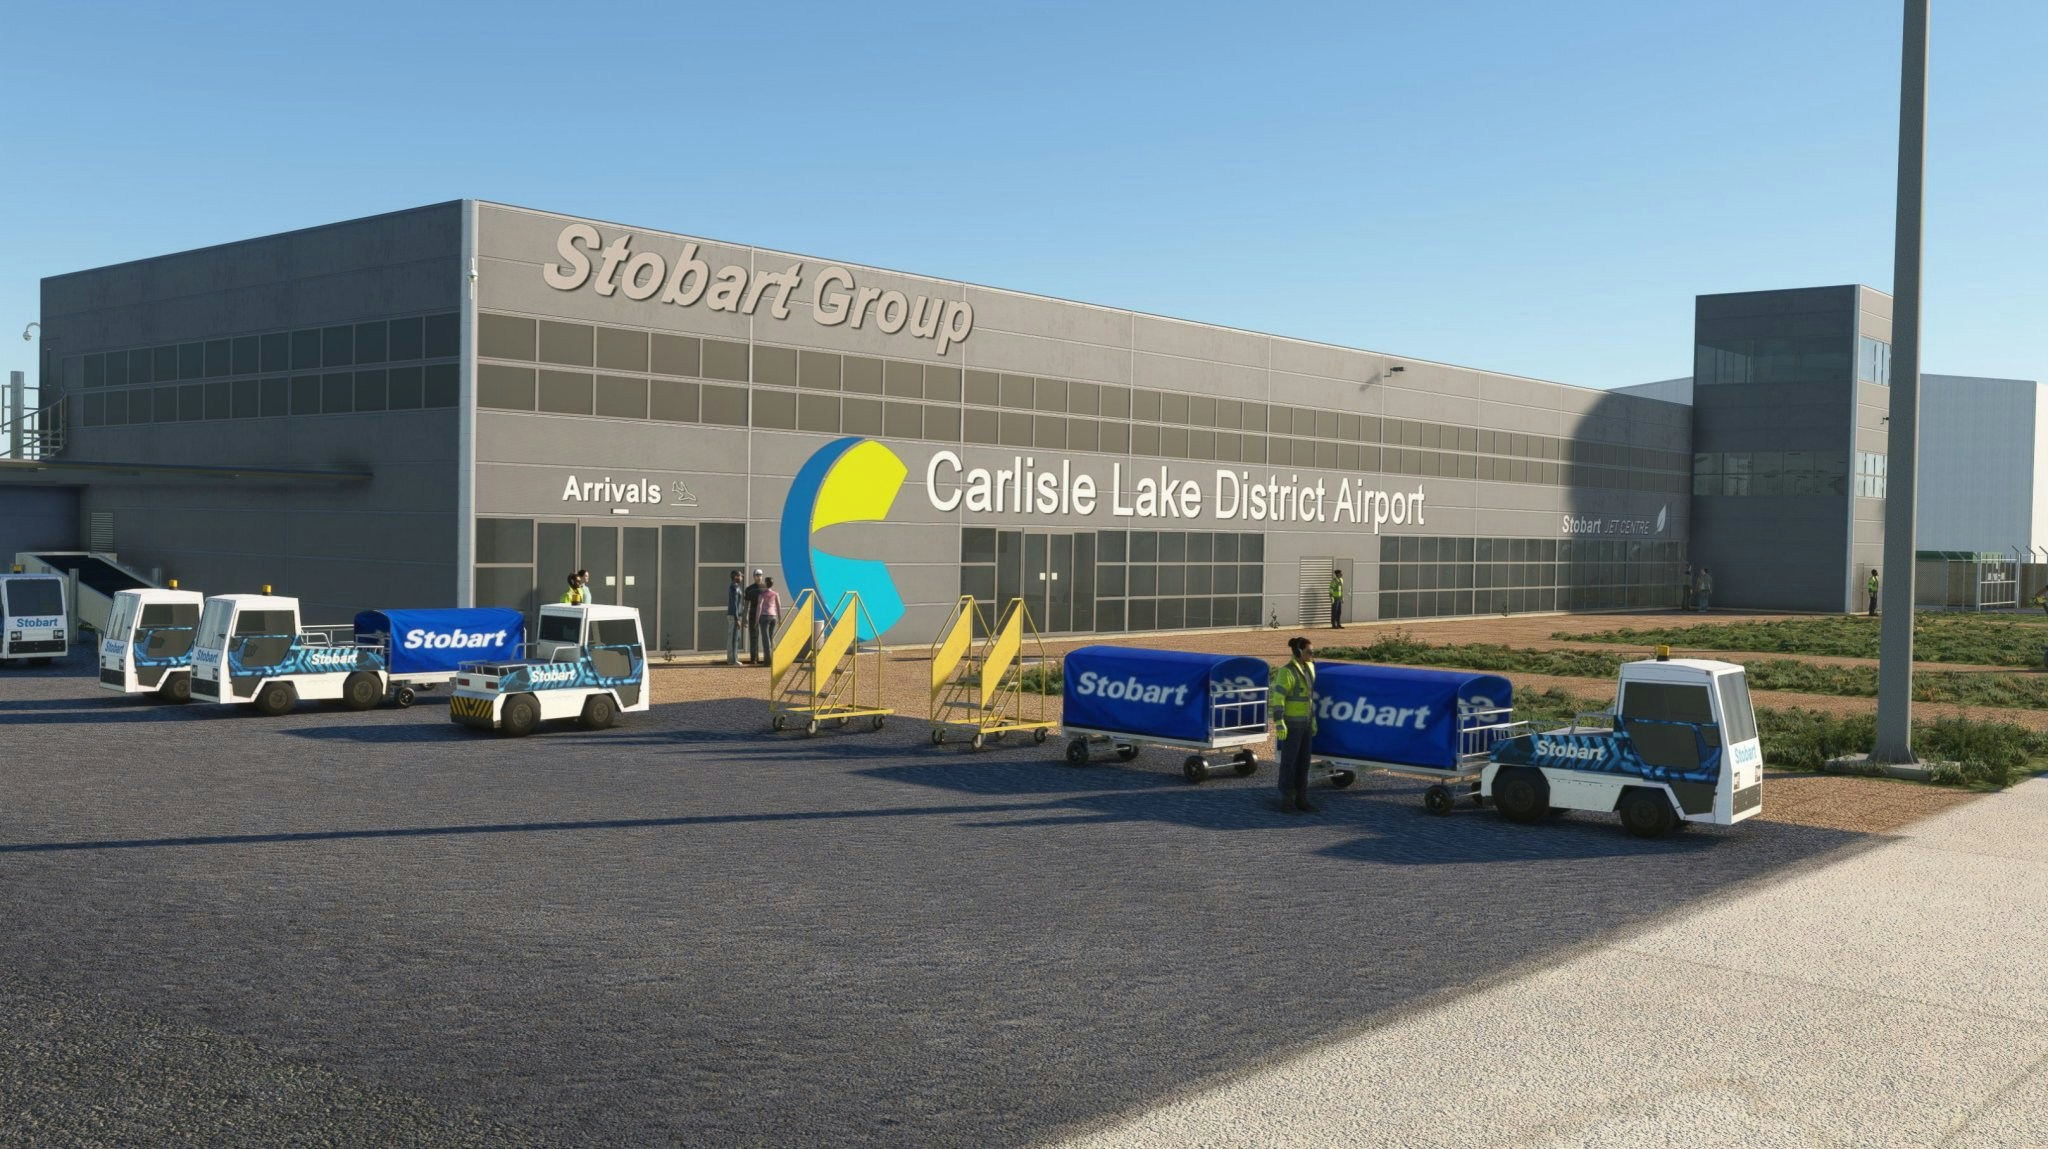 UK2000 Scenery Releases Carlisle Airport for MSFS